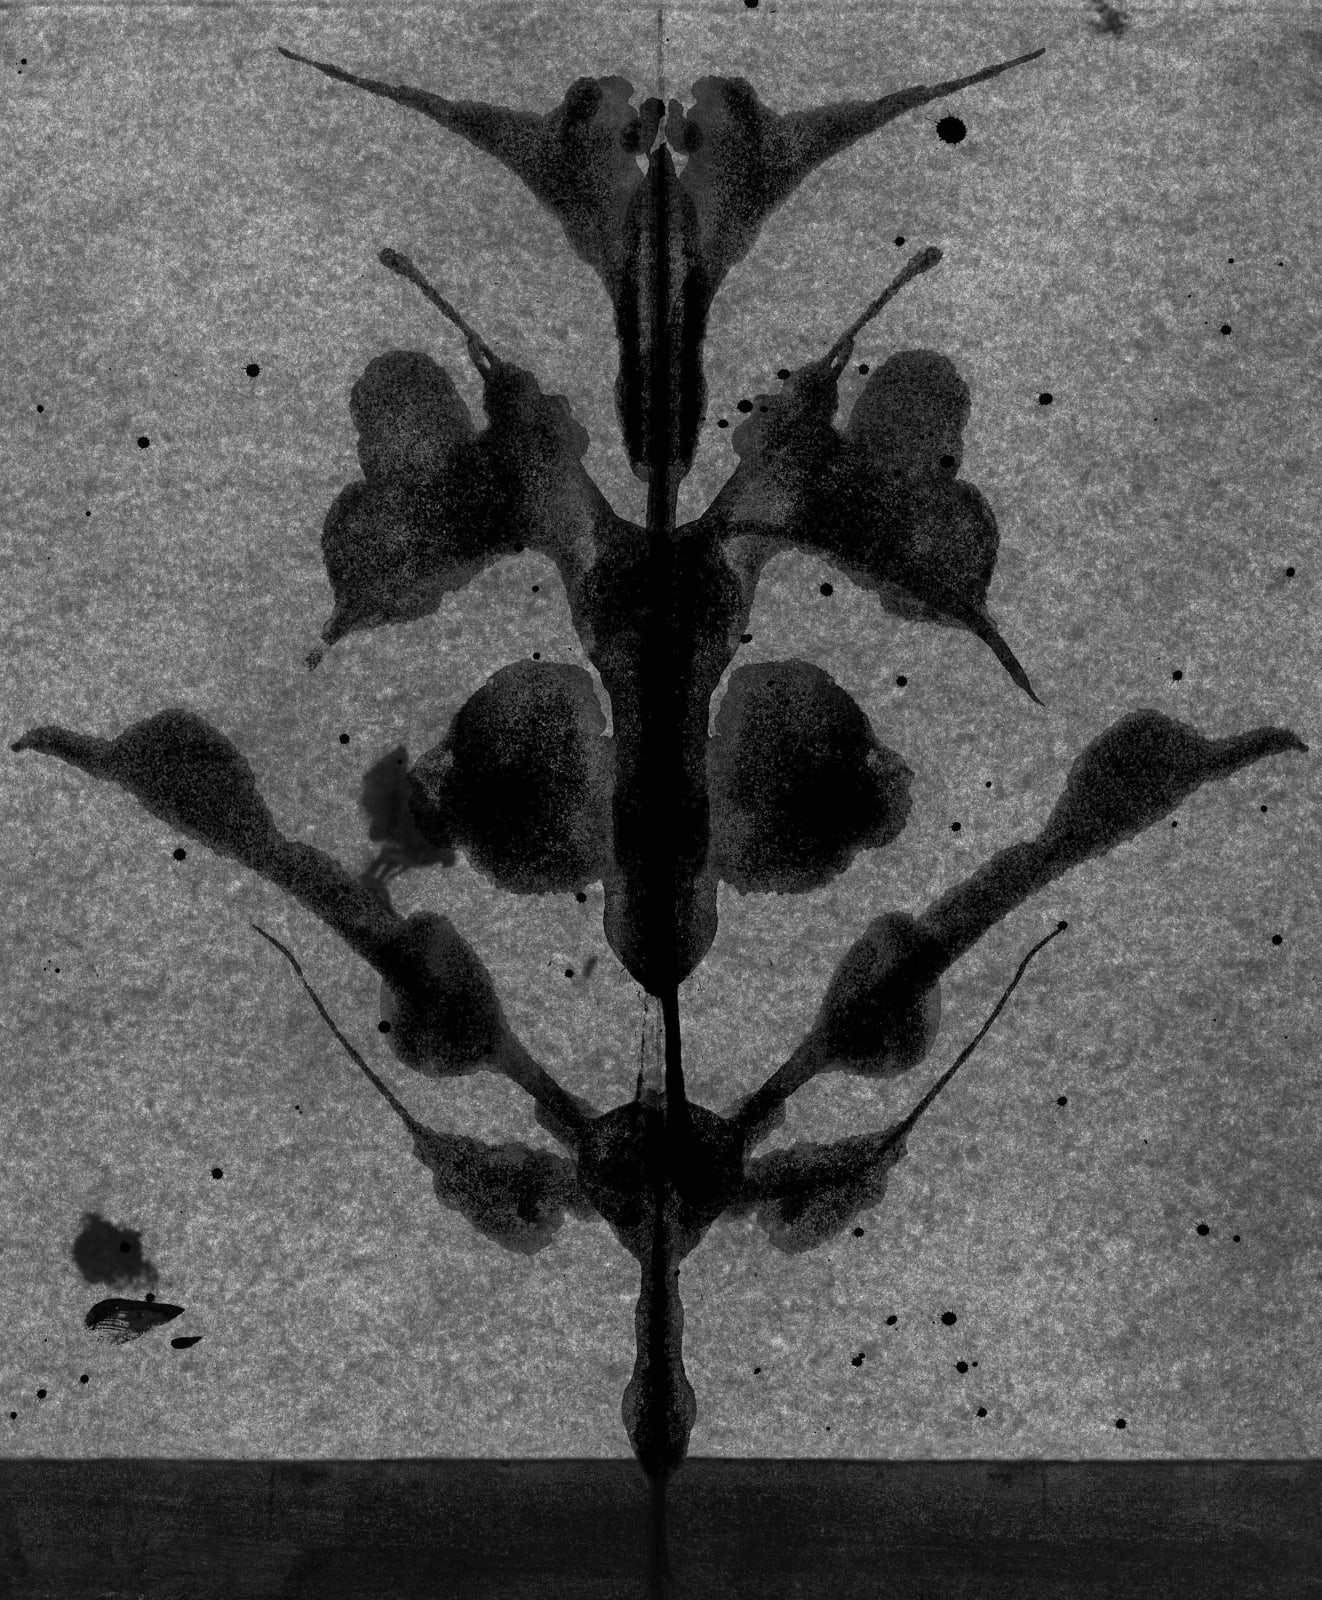 Abelardo Morell Flowers for Lisa #60 Rorschach image of symmetrical blots in shape of a flower black and white